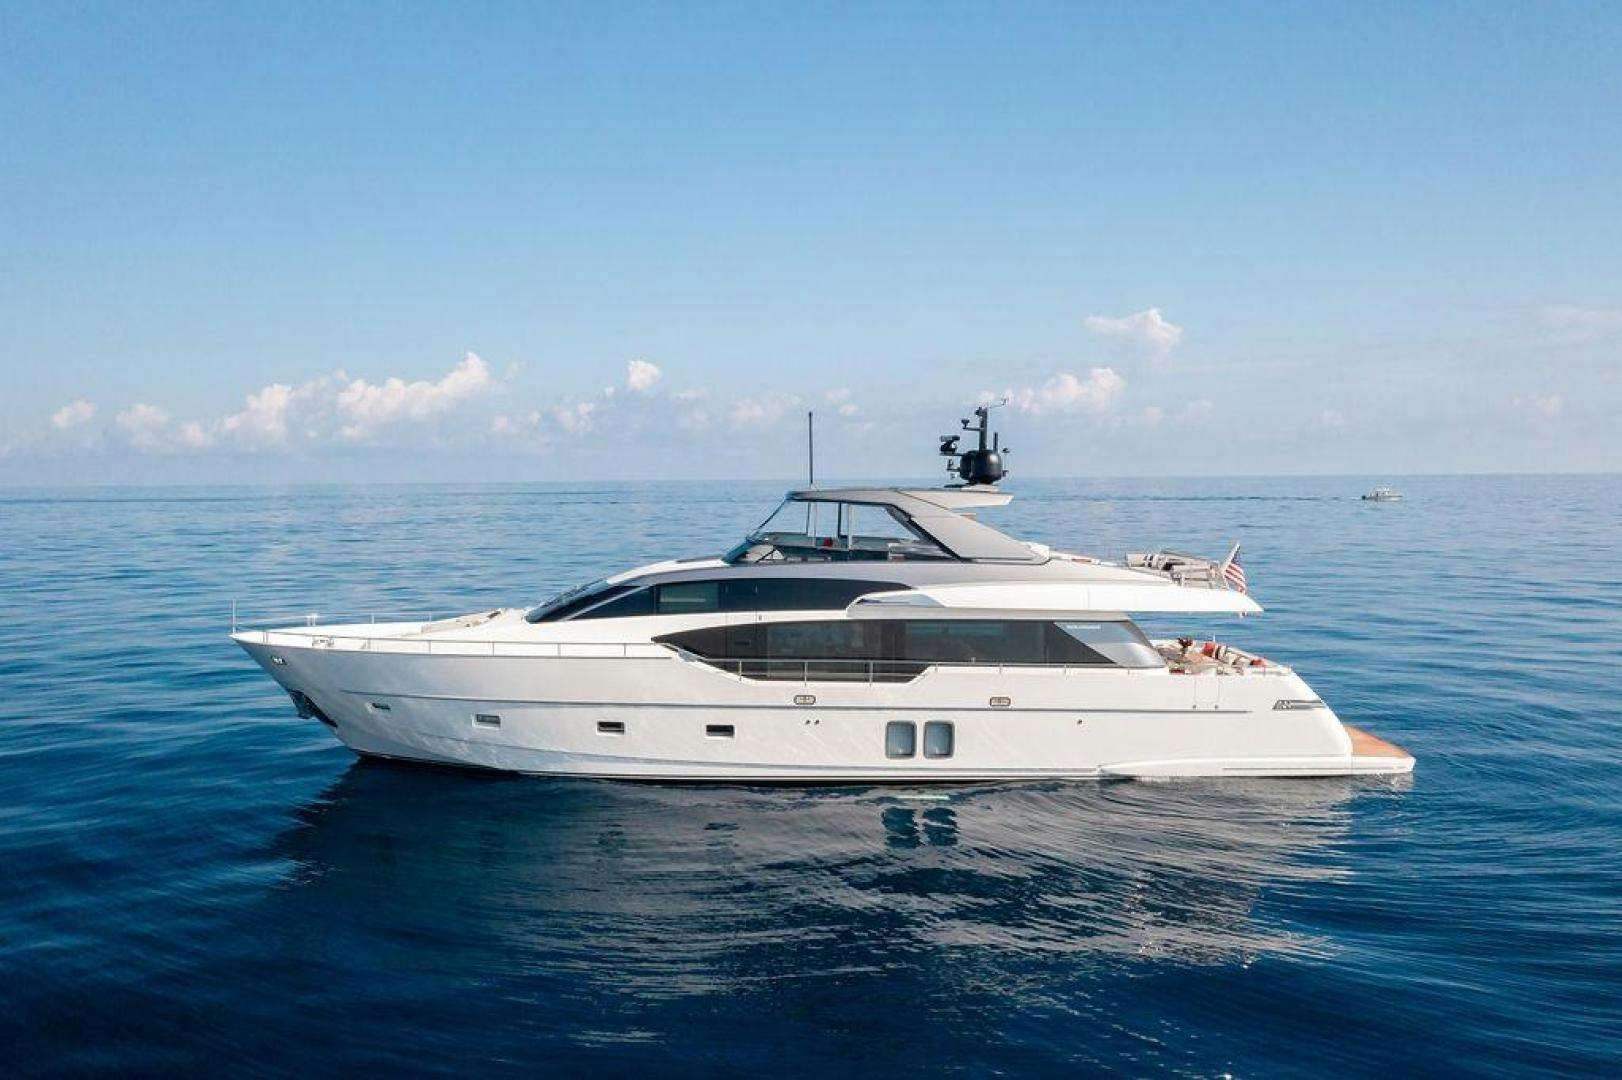 Miss liza
Yacht for Sale